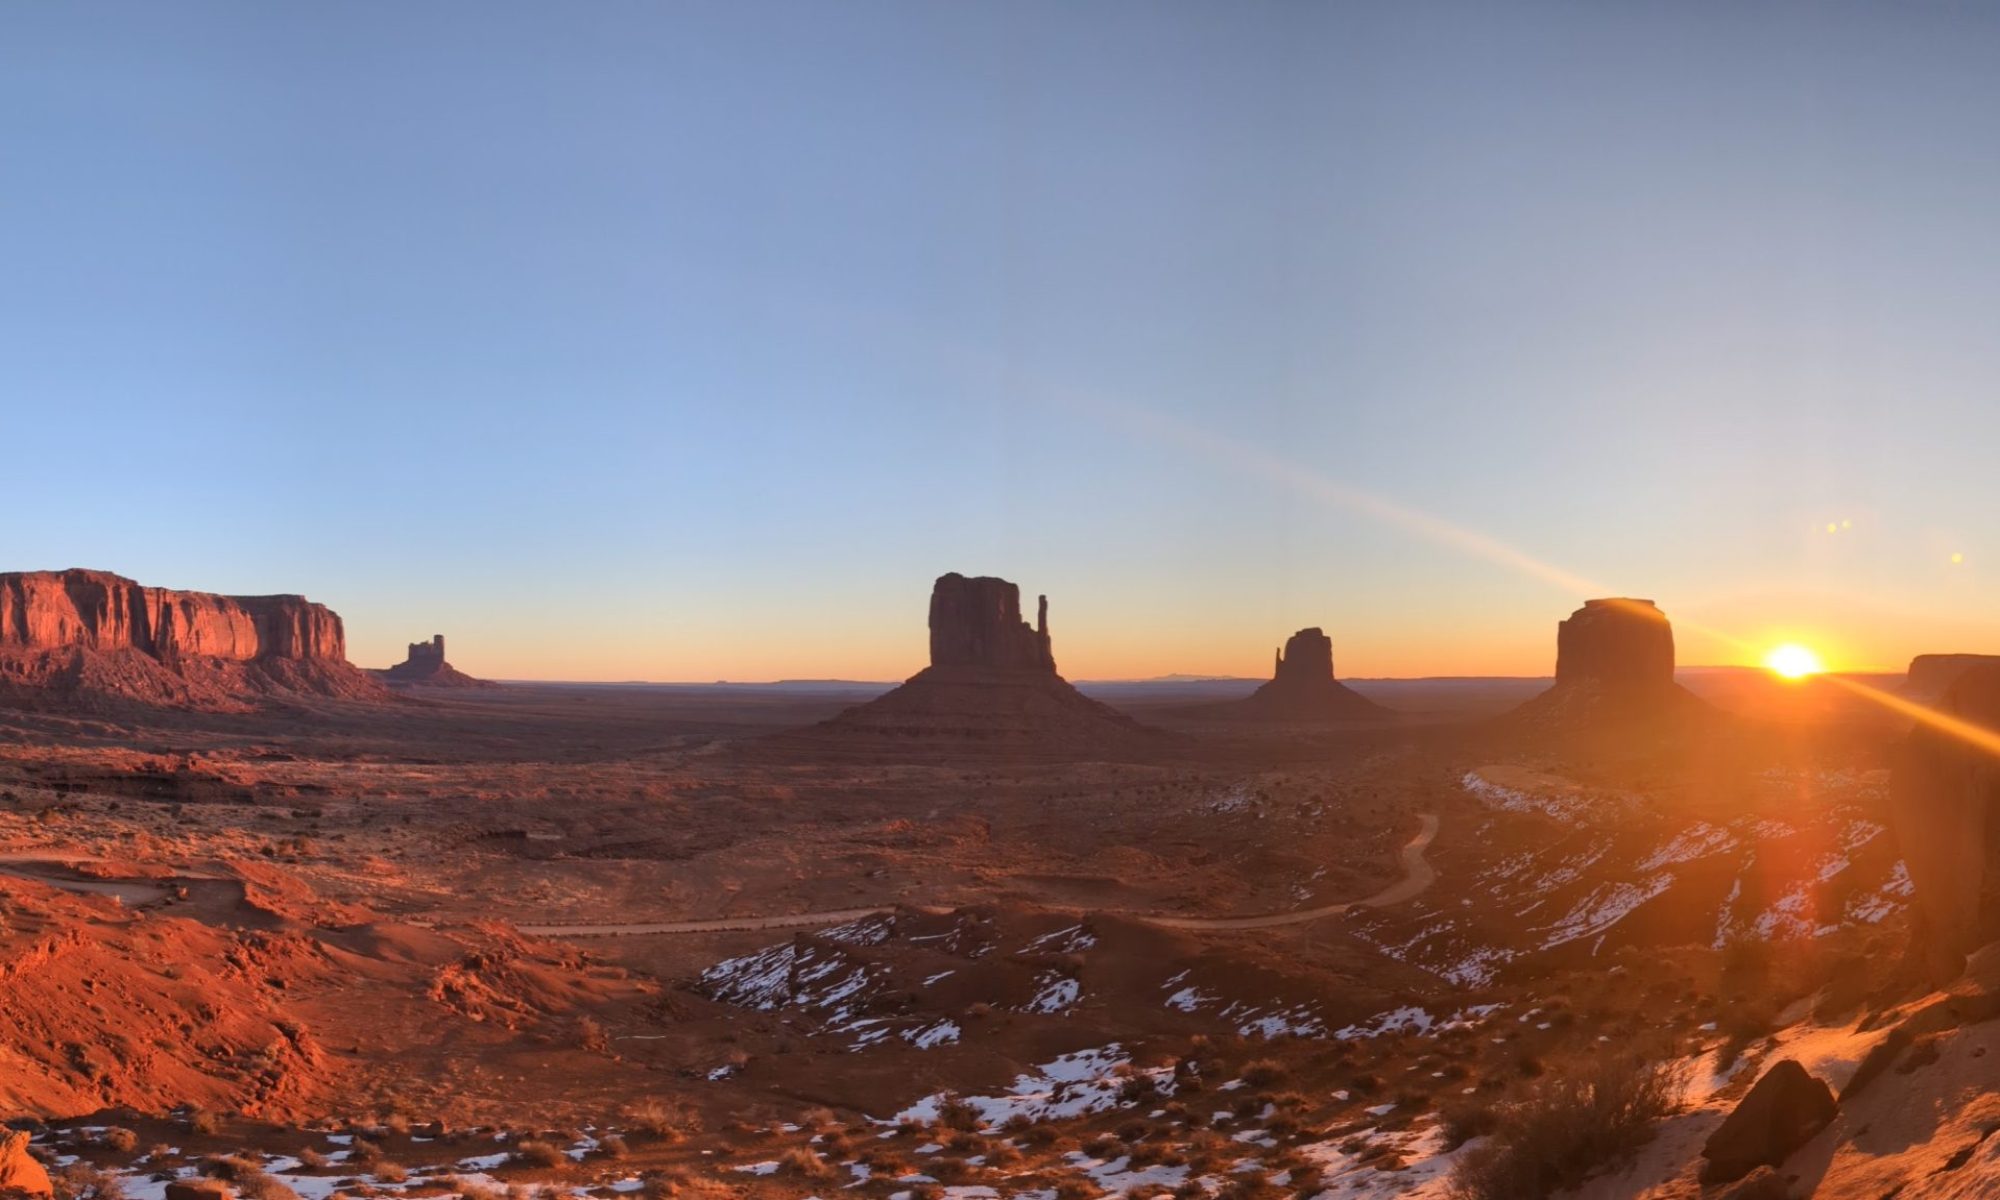 Dawn at Monument Valley